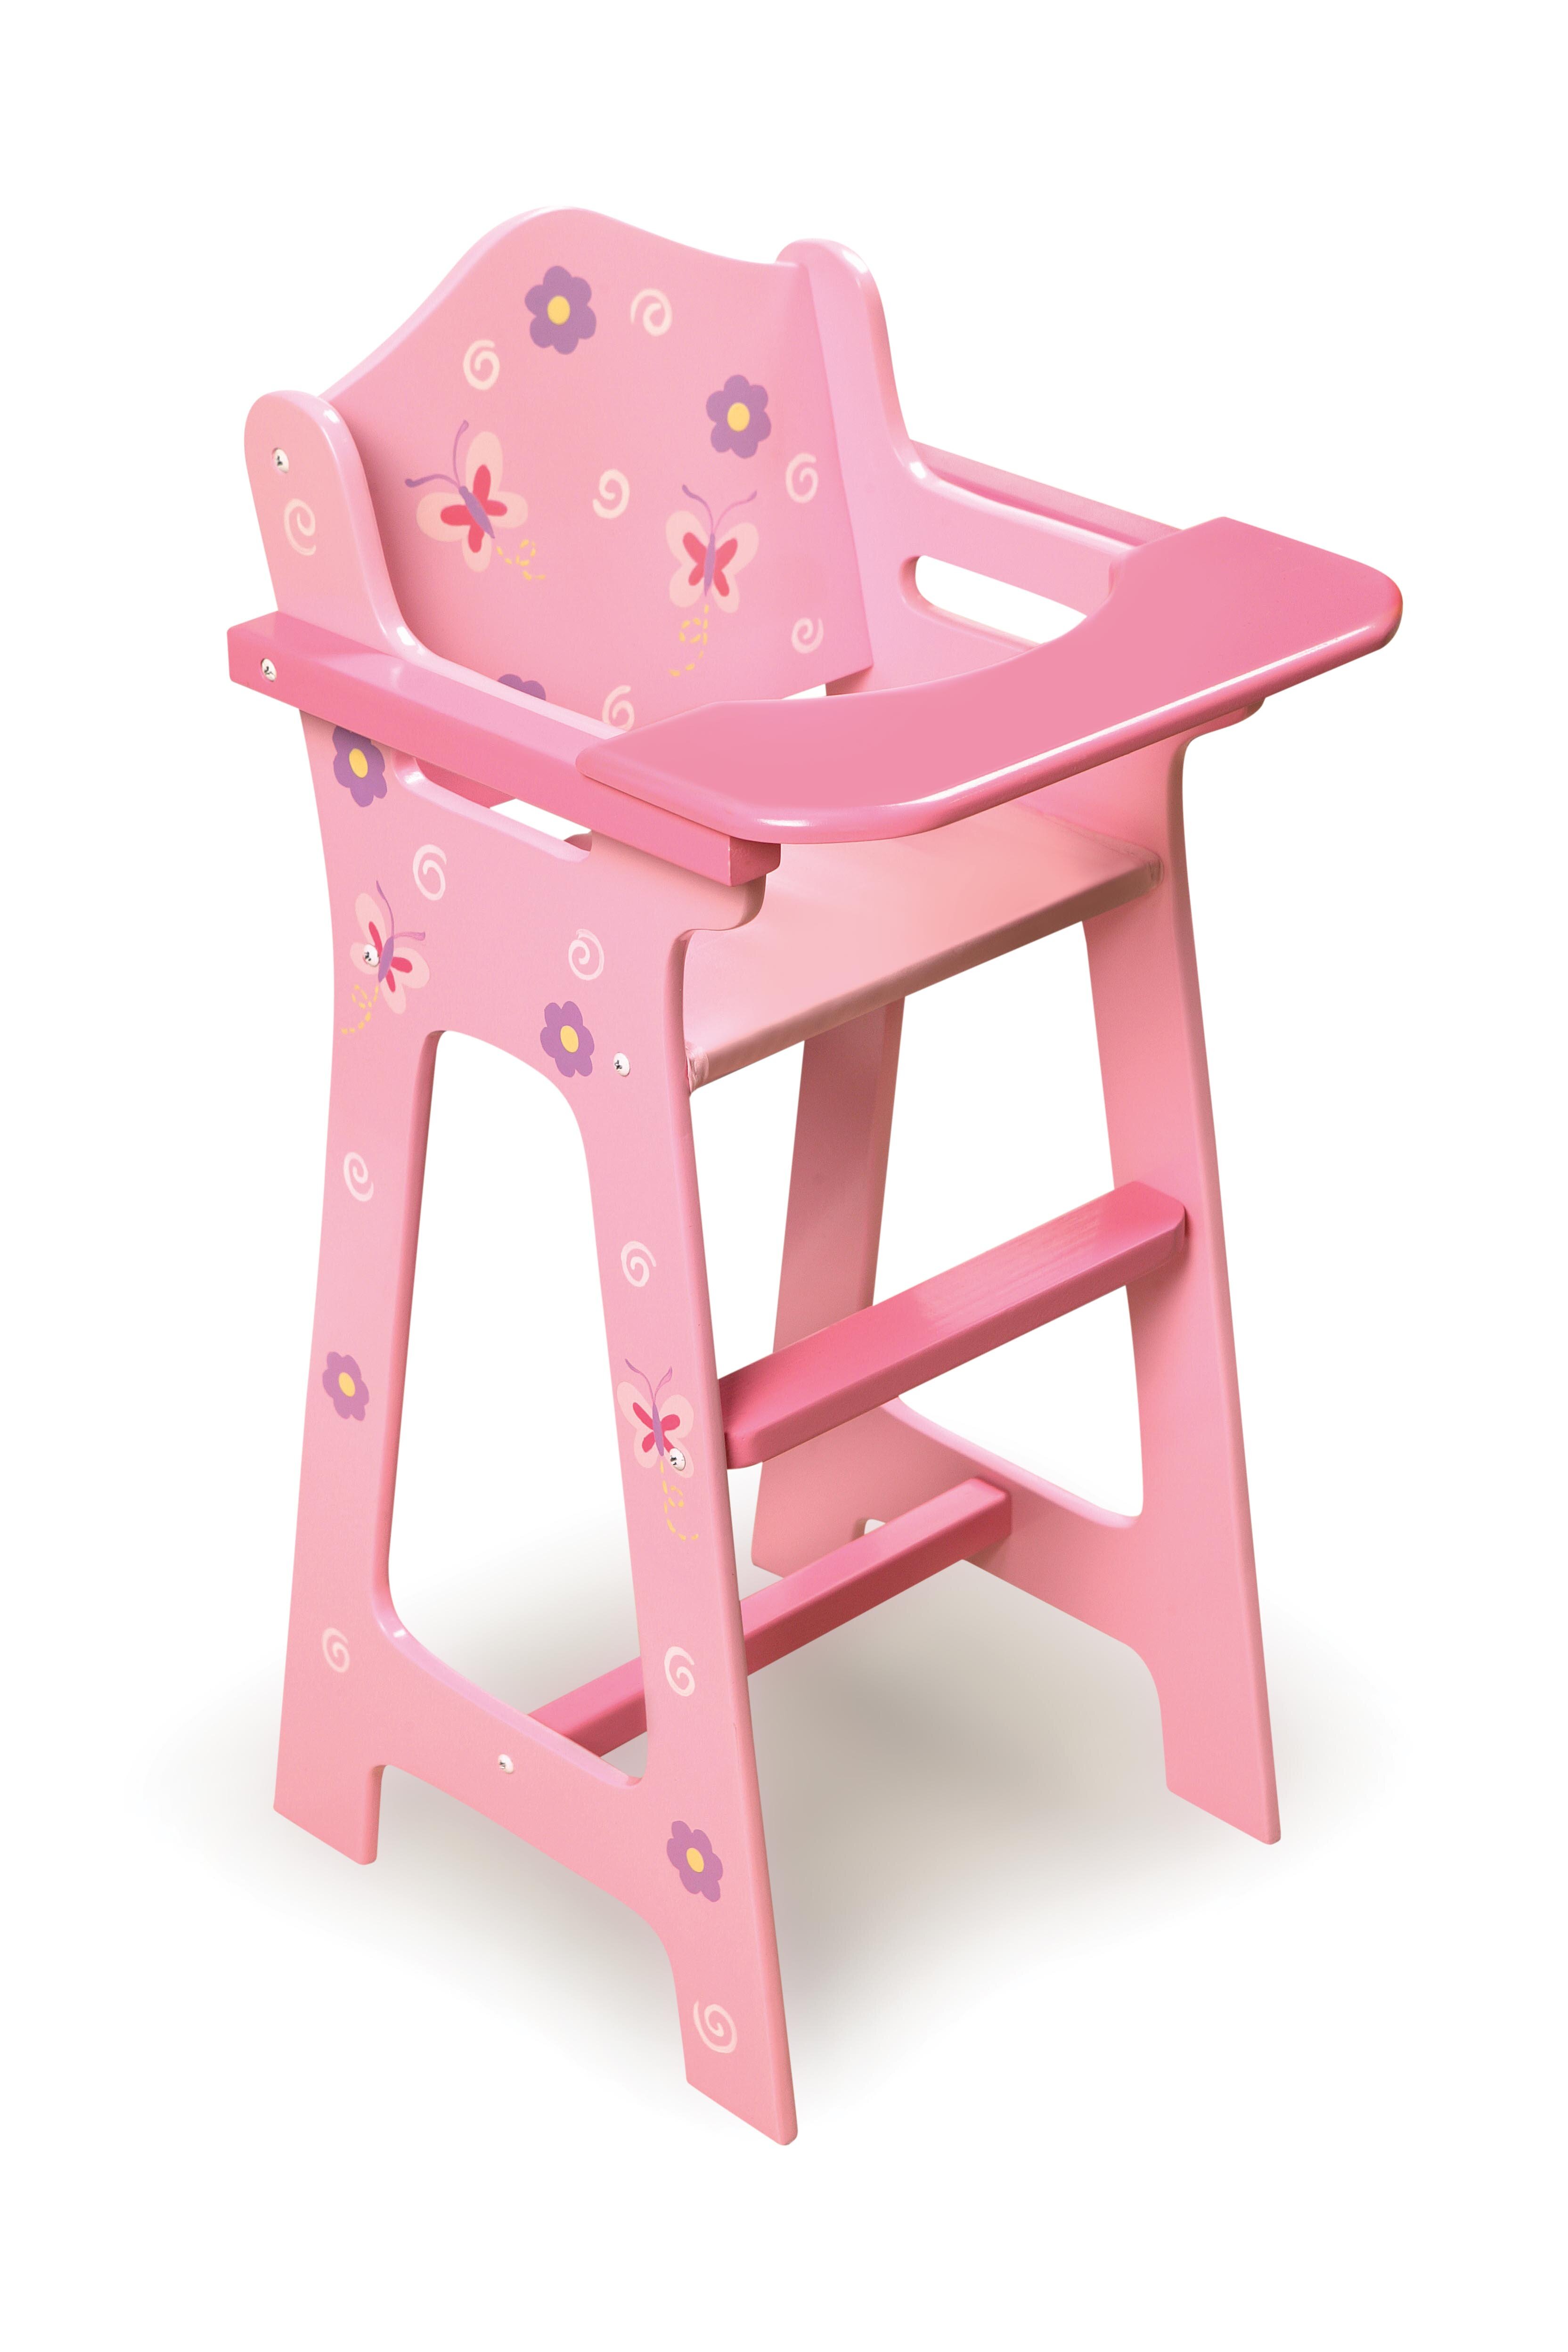 high chair for doll